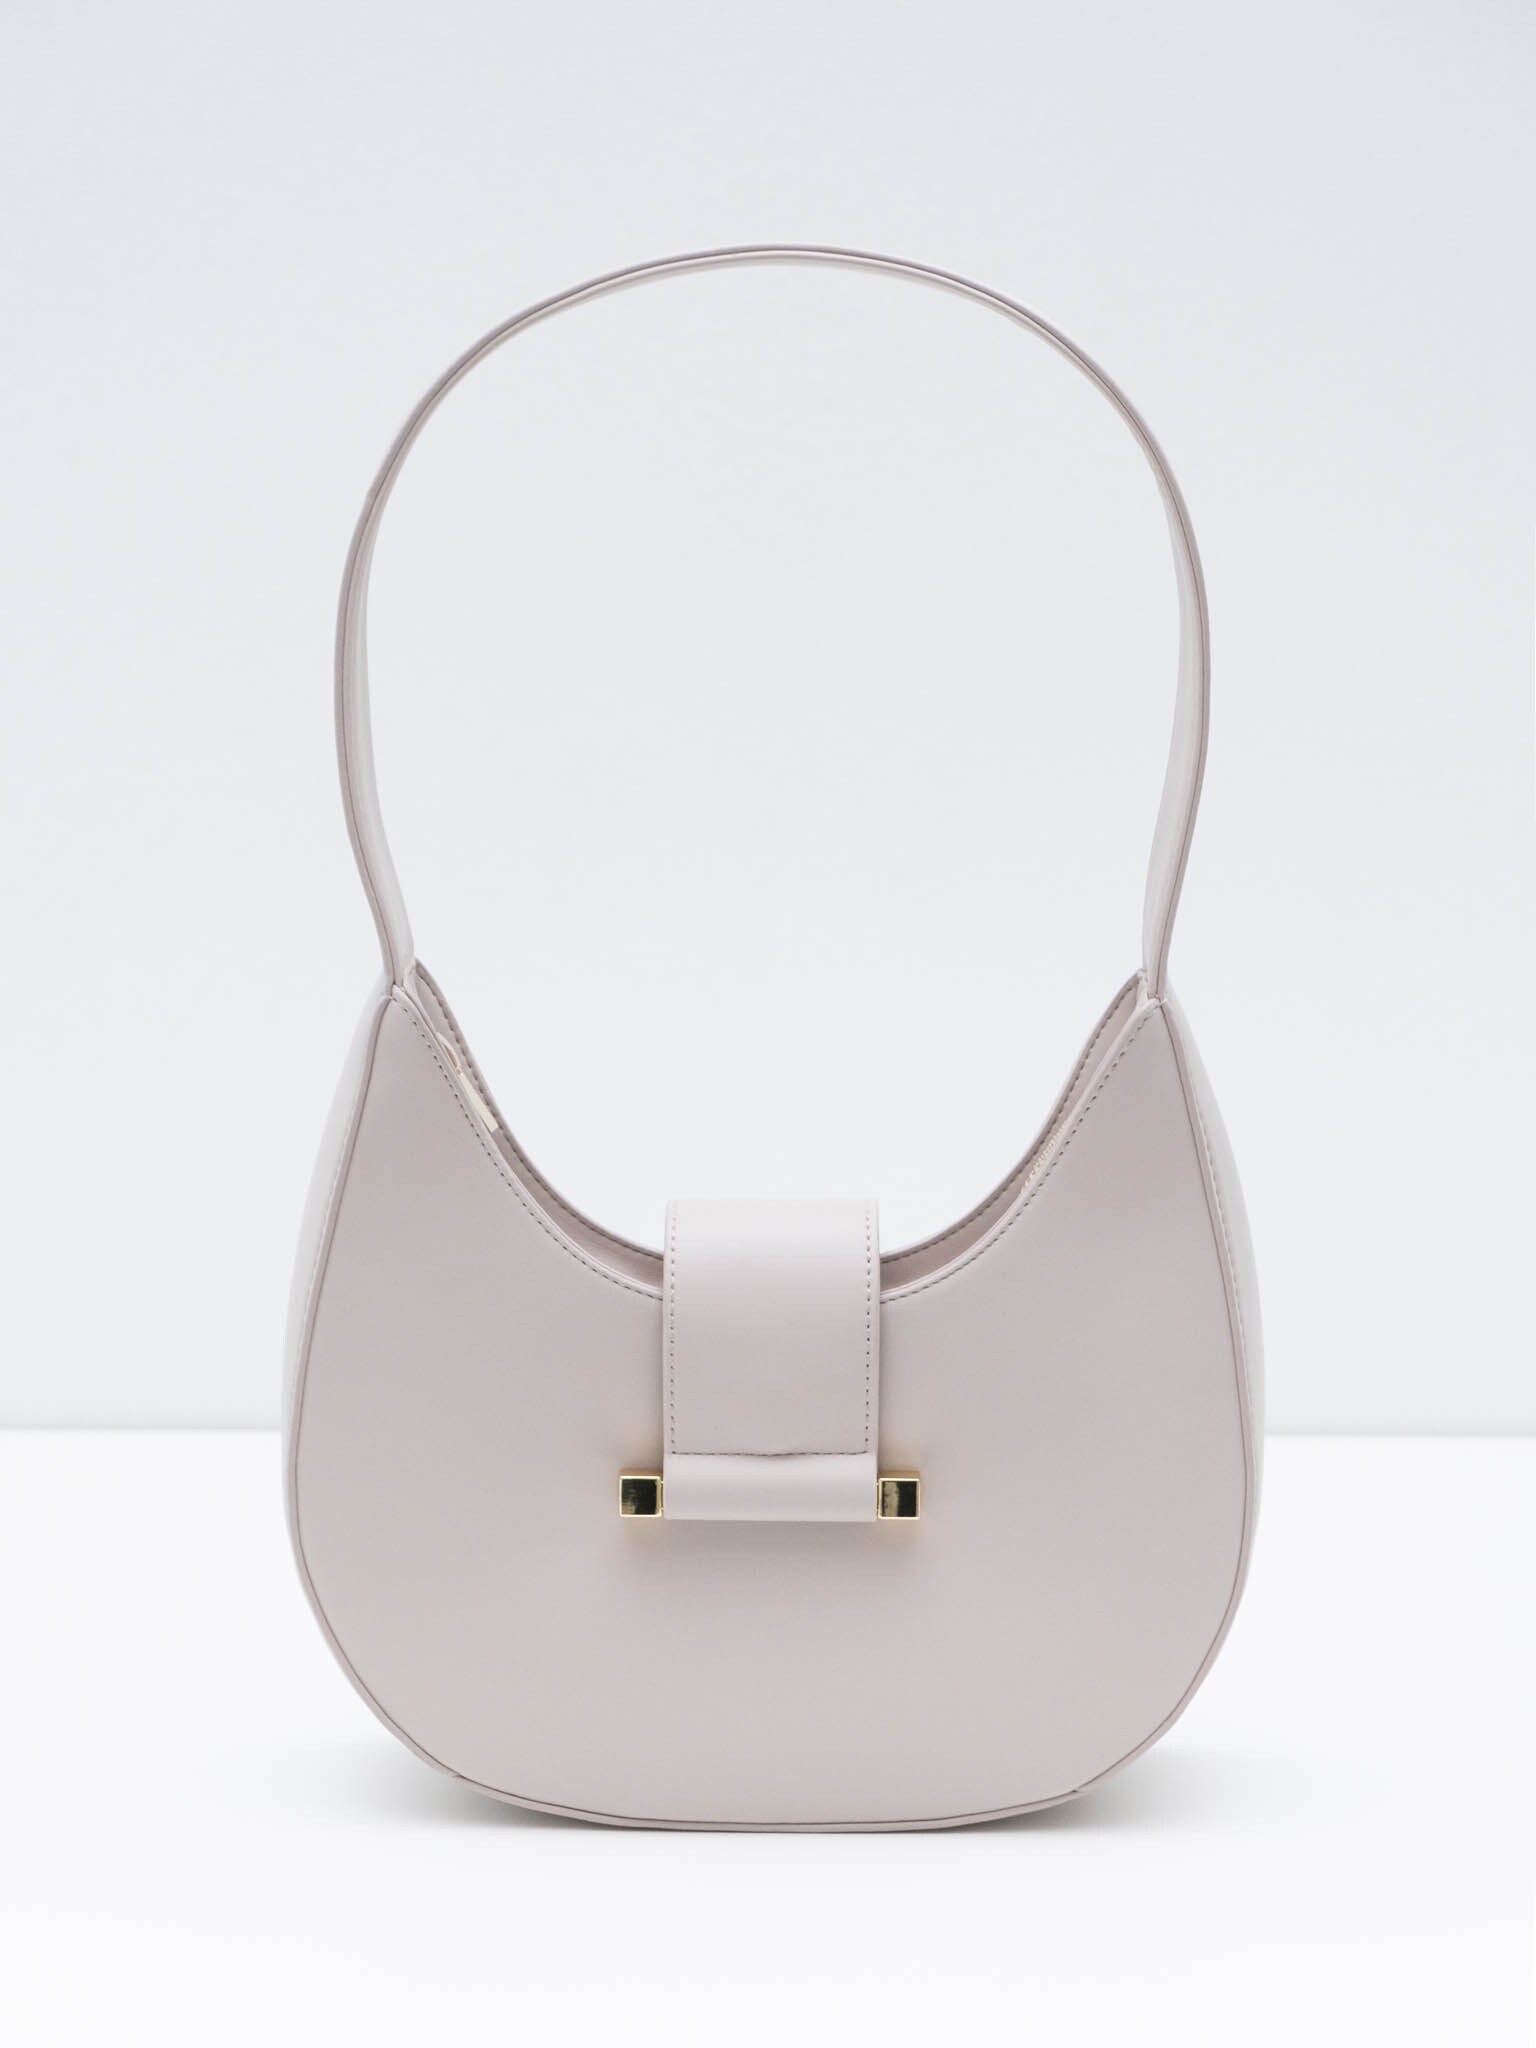 Square hard bag with a wide shoulder strap :: LICHI - Online fashion store